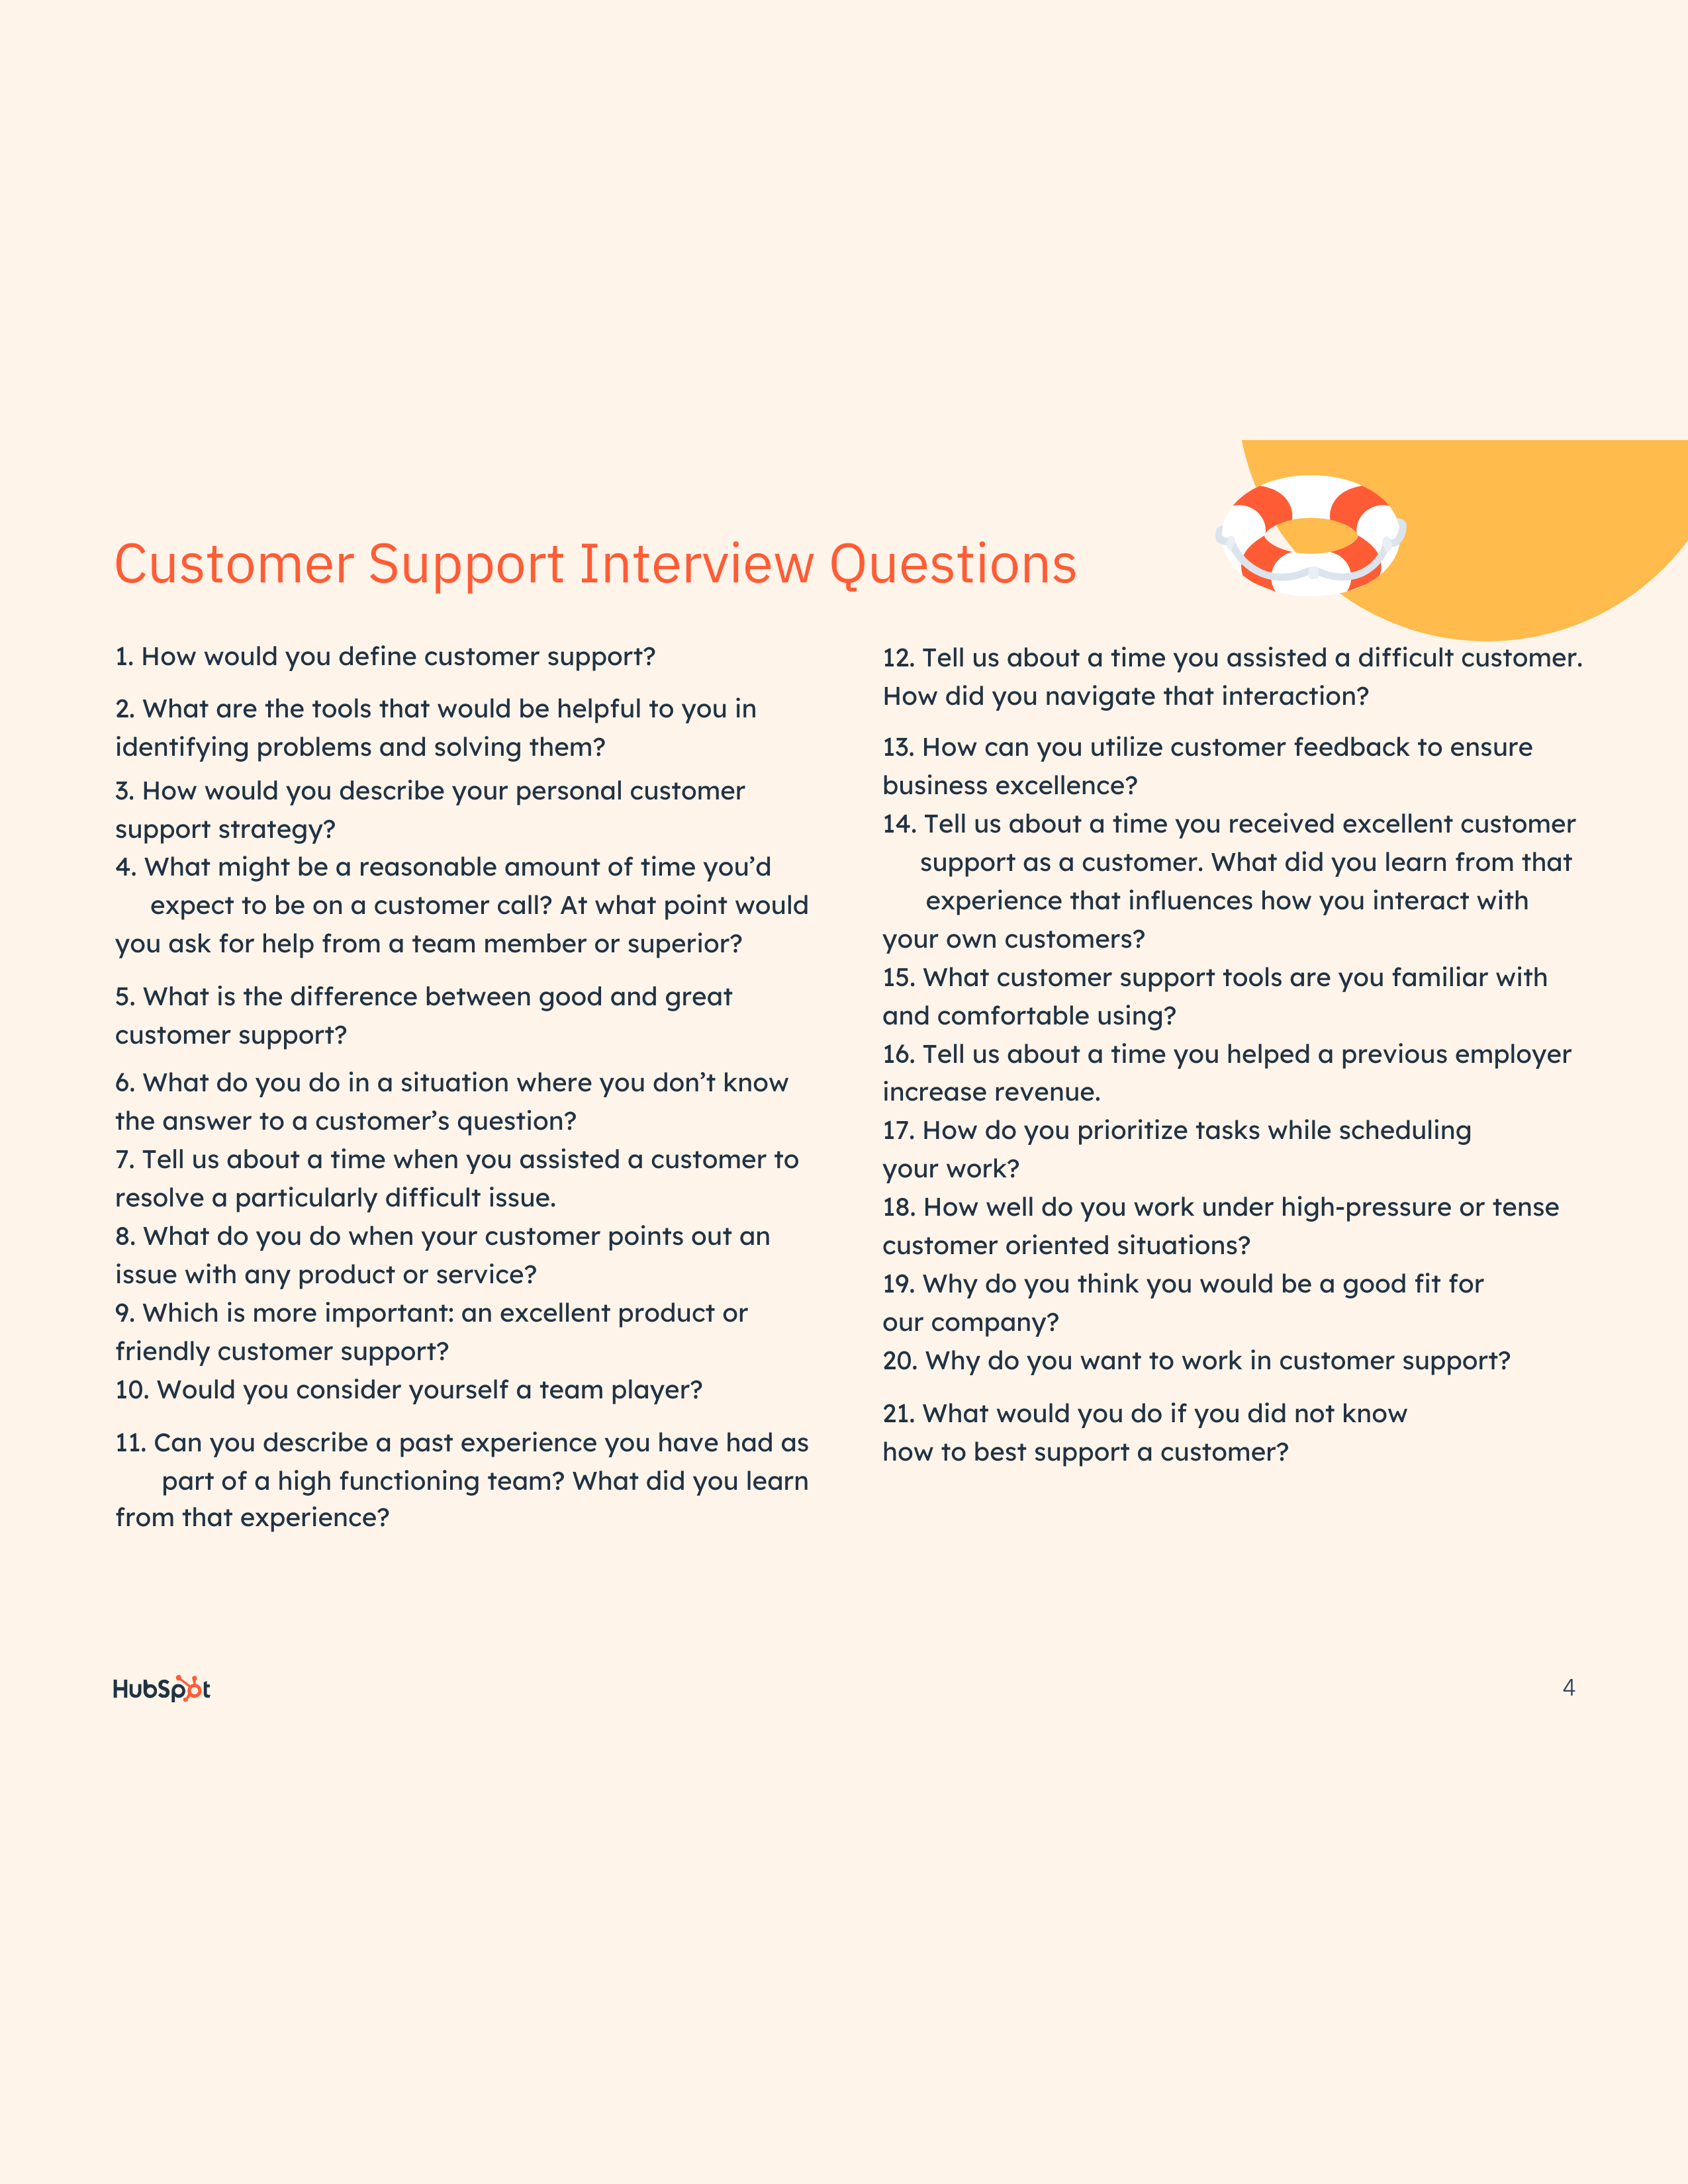 customer-support-questions-content